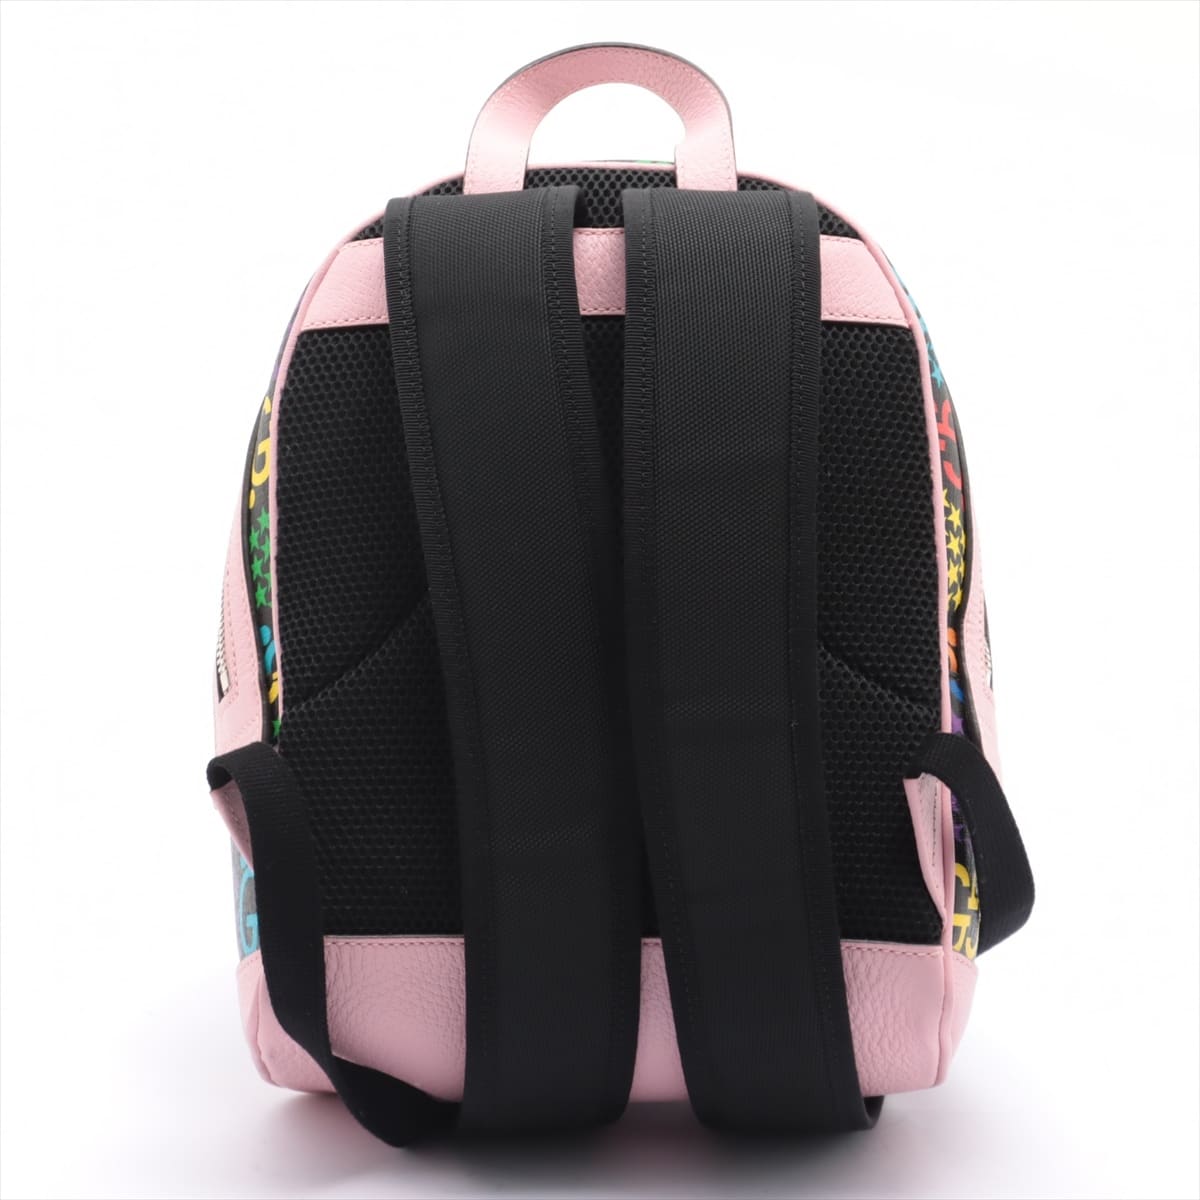 Gucci GG cychedelic Backpack Pink 601296